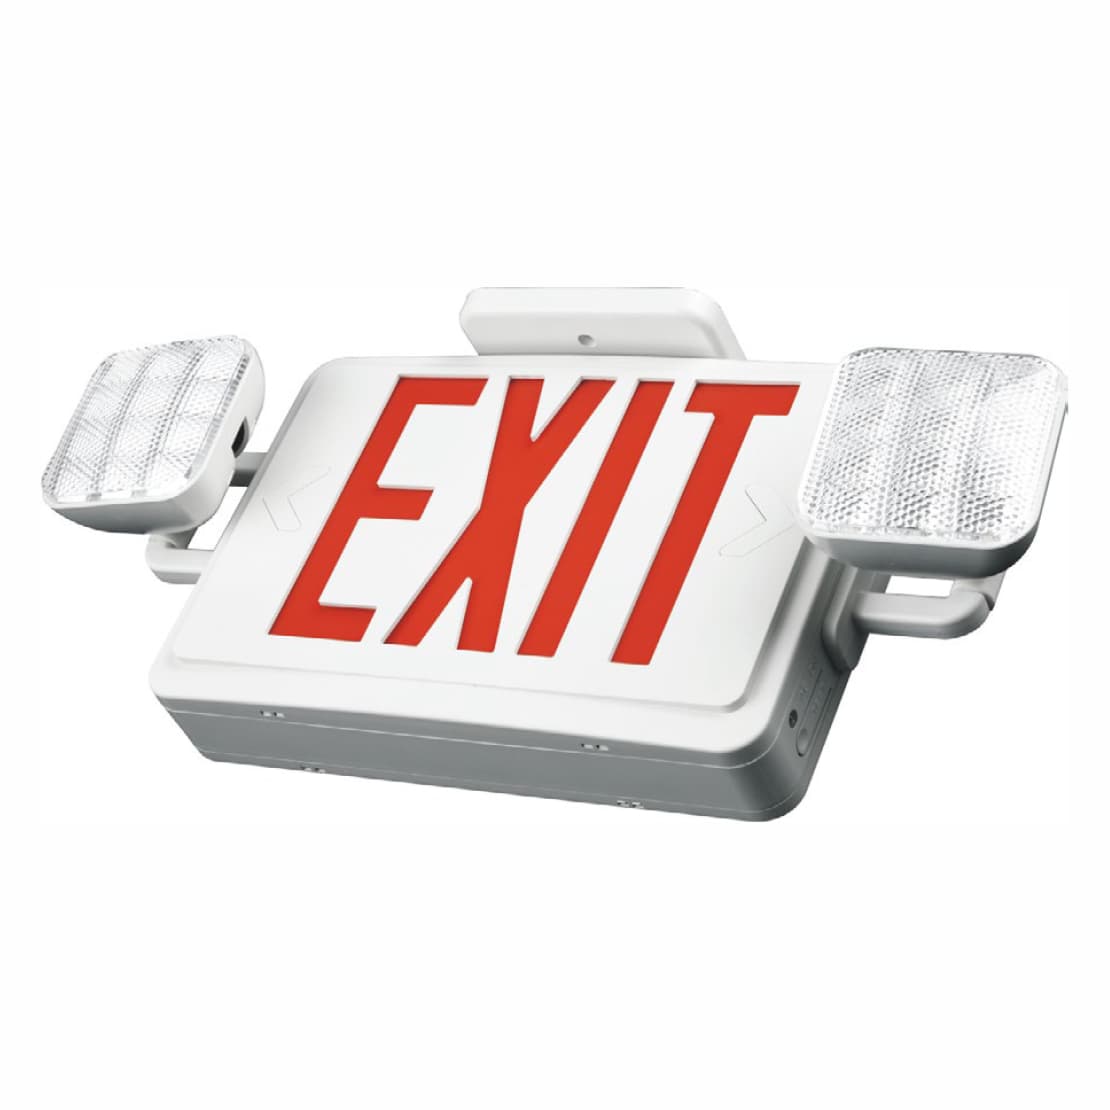 apology authority Bitterness Compact Emergency Exit Sign by ATG LED Lighting in Souther California